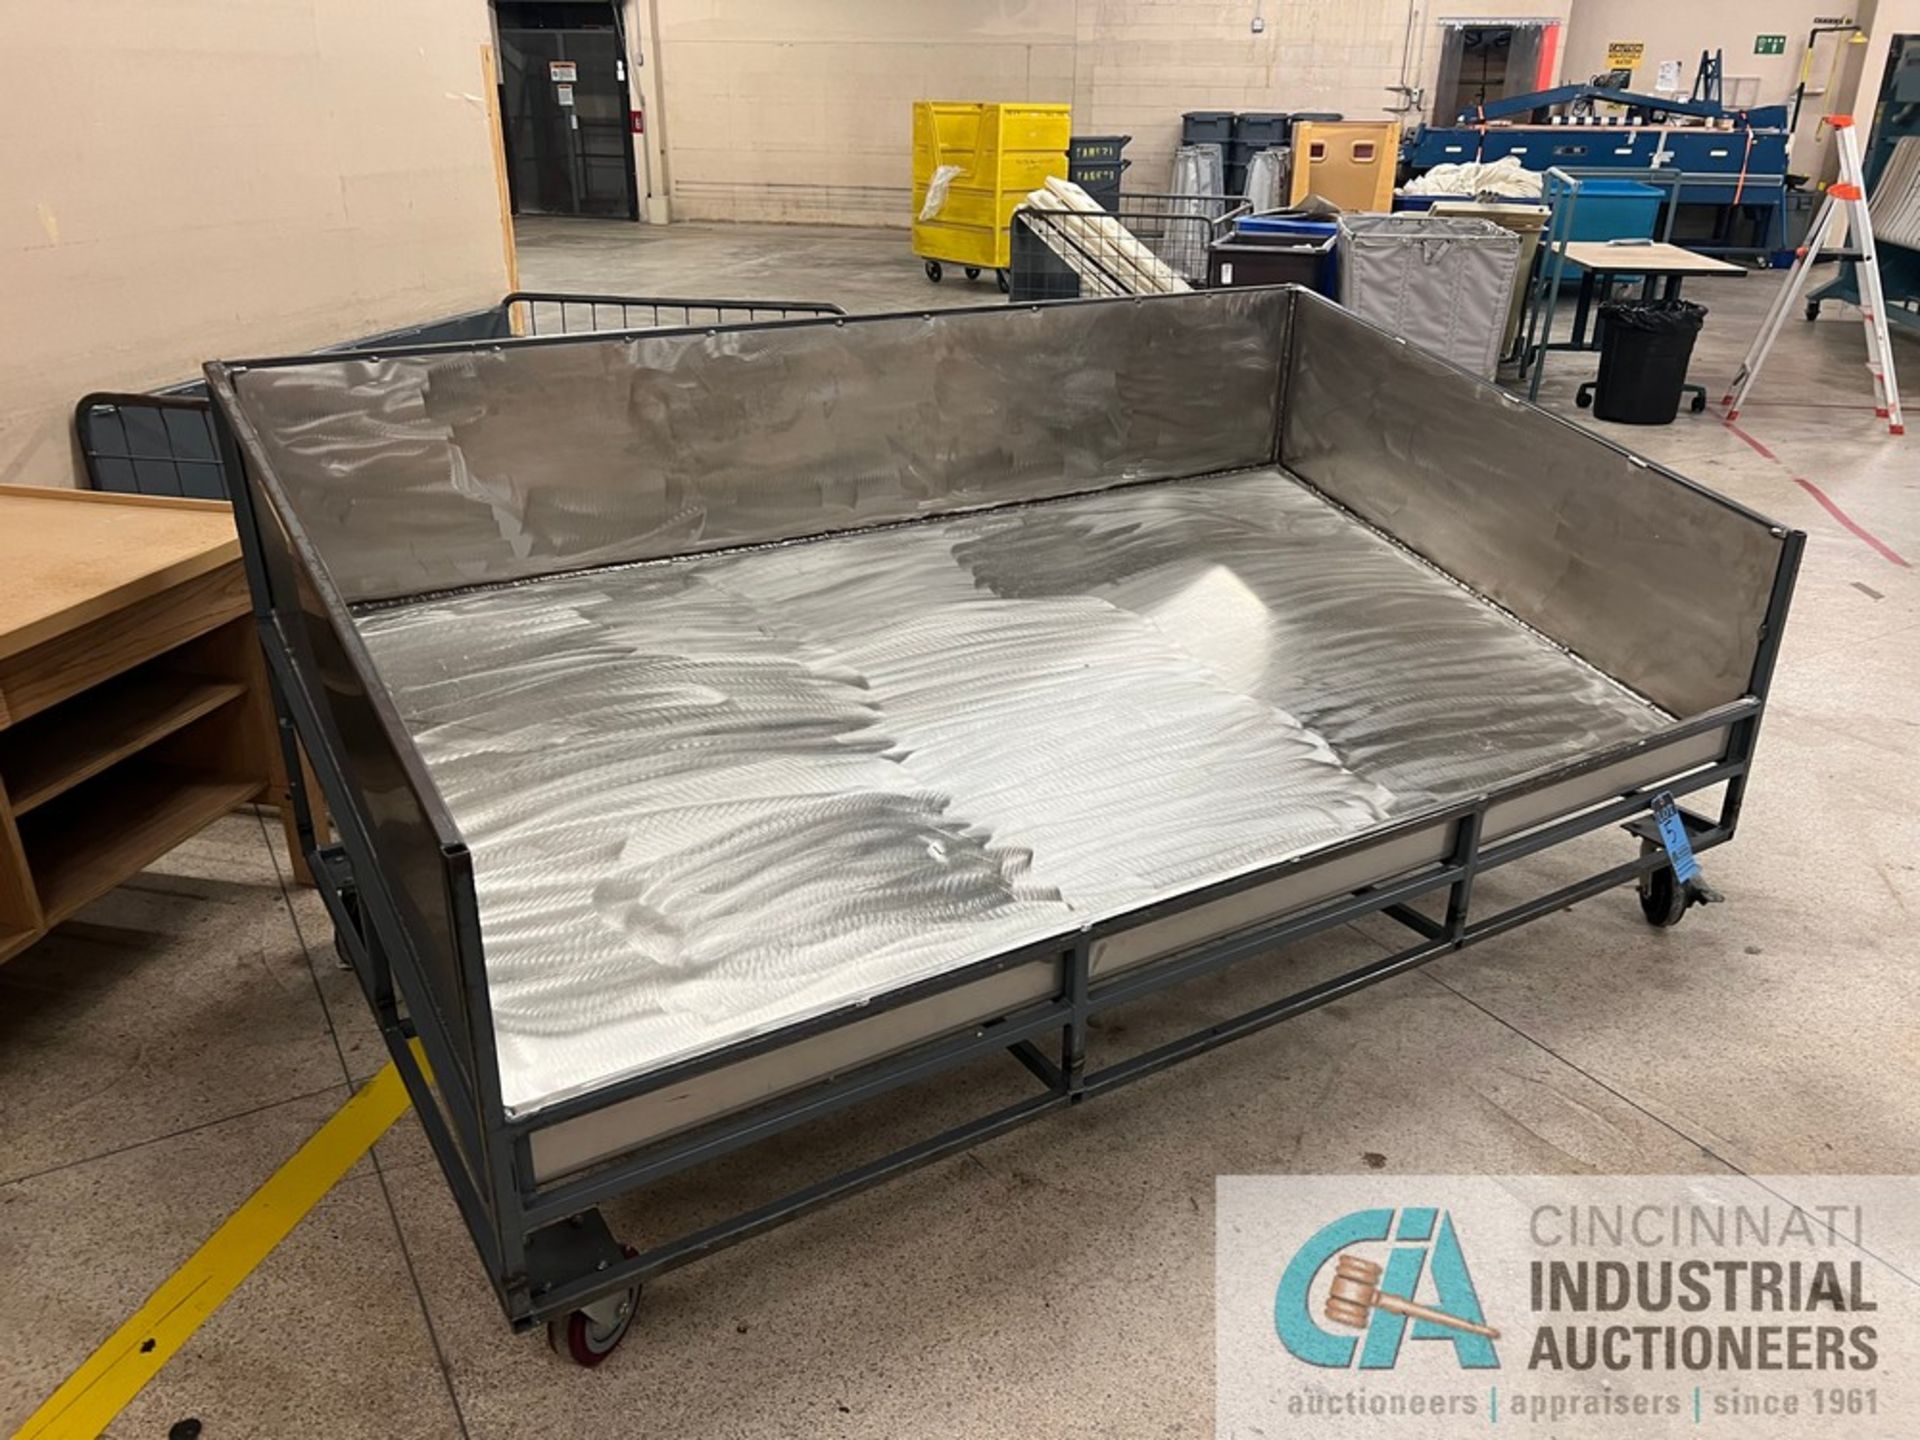 52" X 93" LONG X 17" HIGH STAINLESS STEEL TUB STEEL FRAME SORTING CART, 44" OVERALL HEIGHT - Image 2 of 3